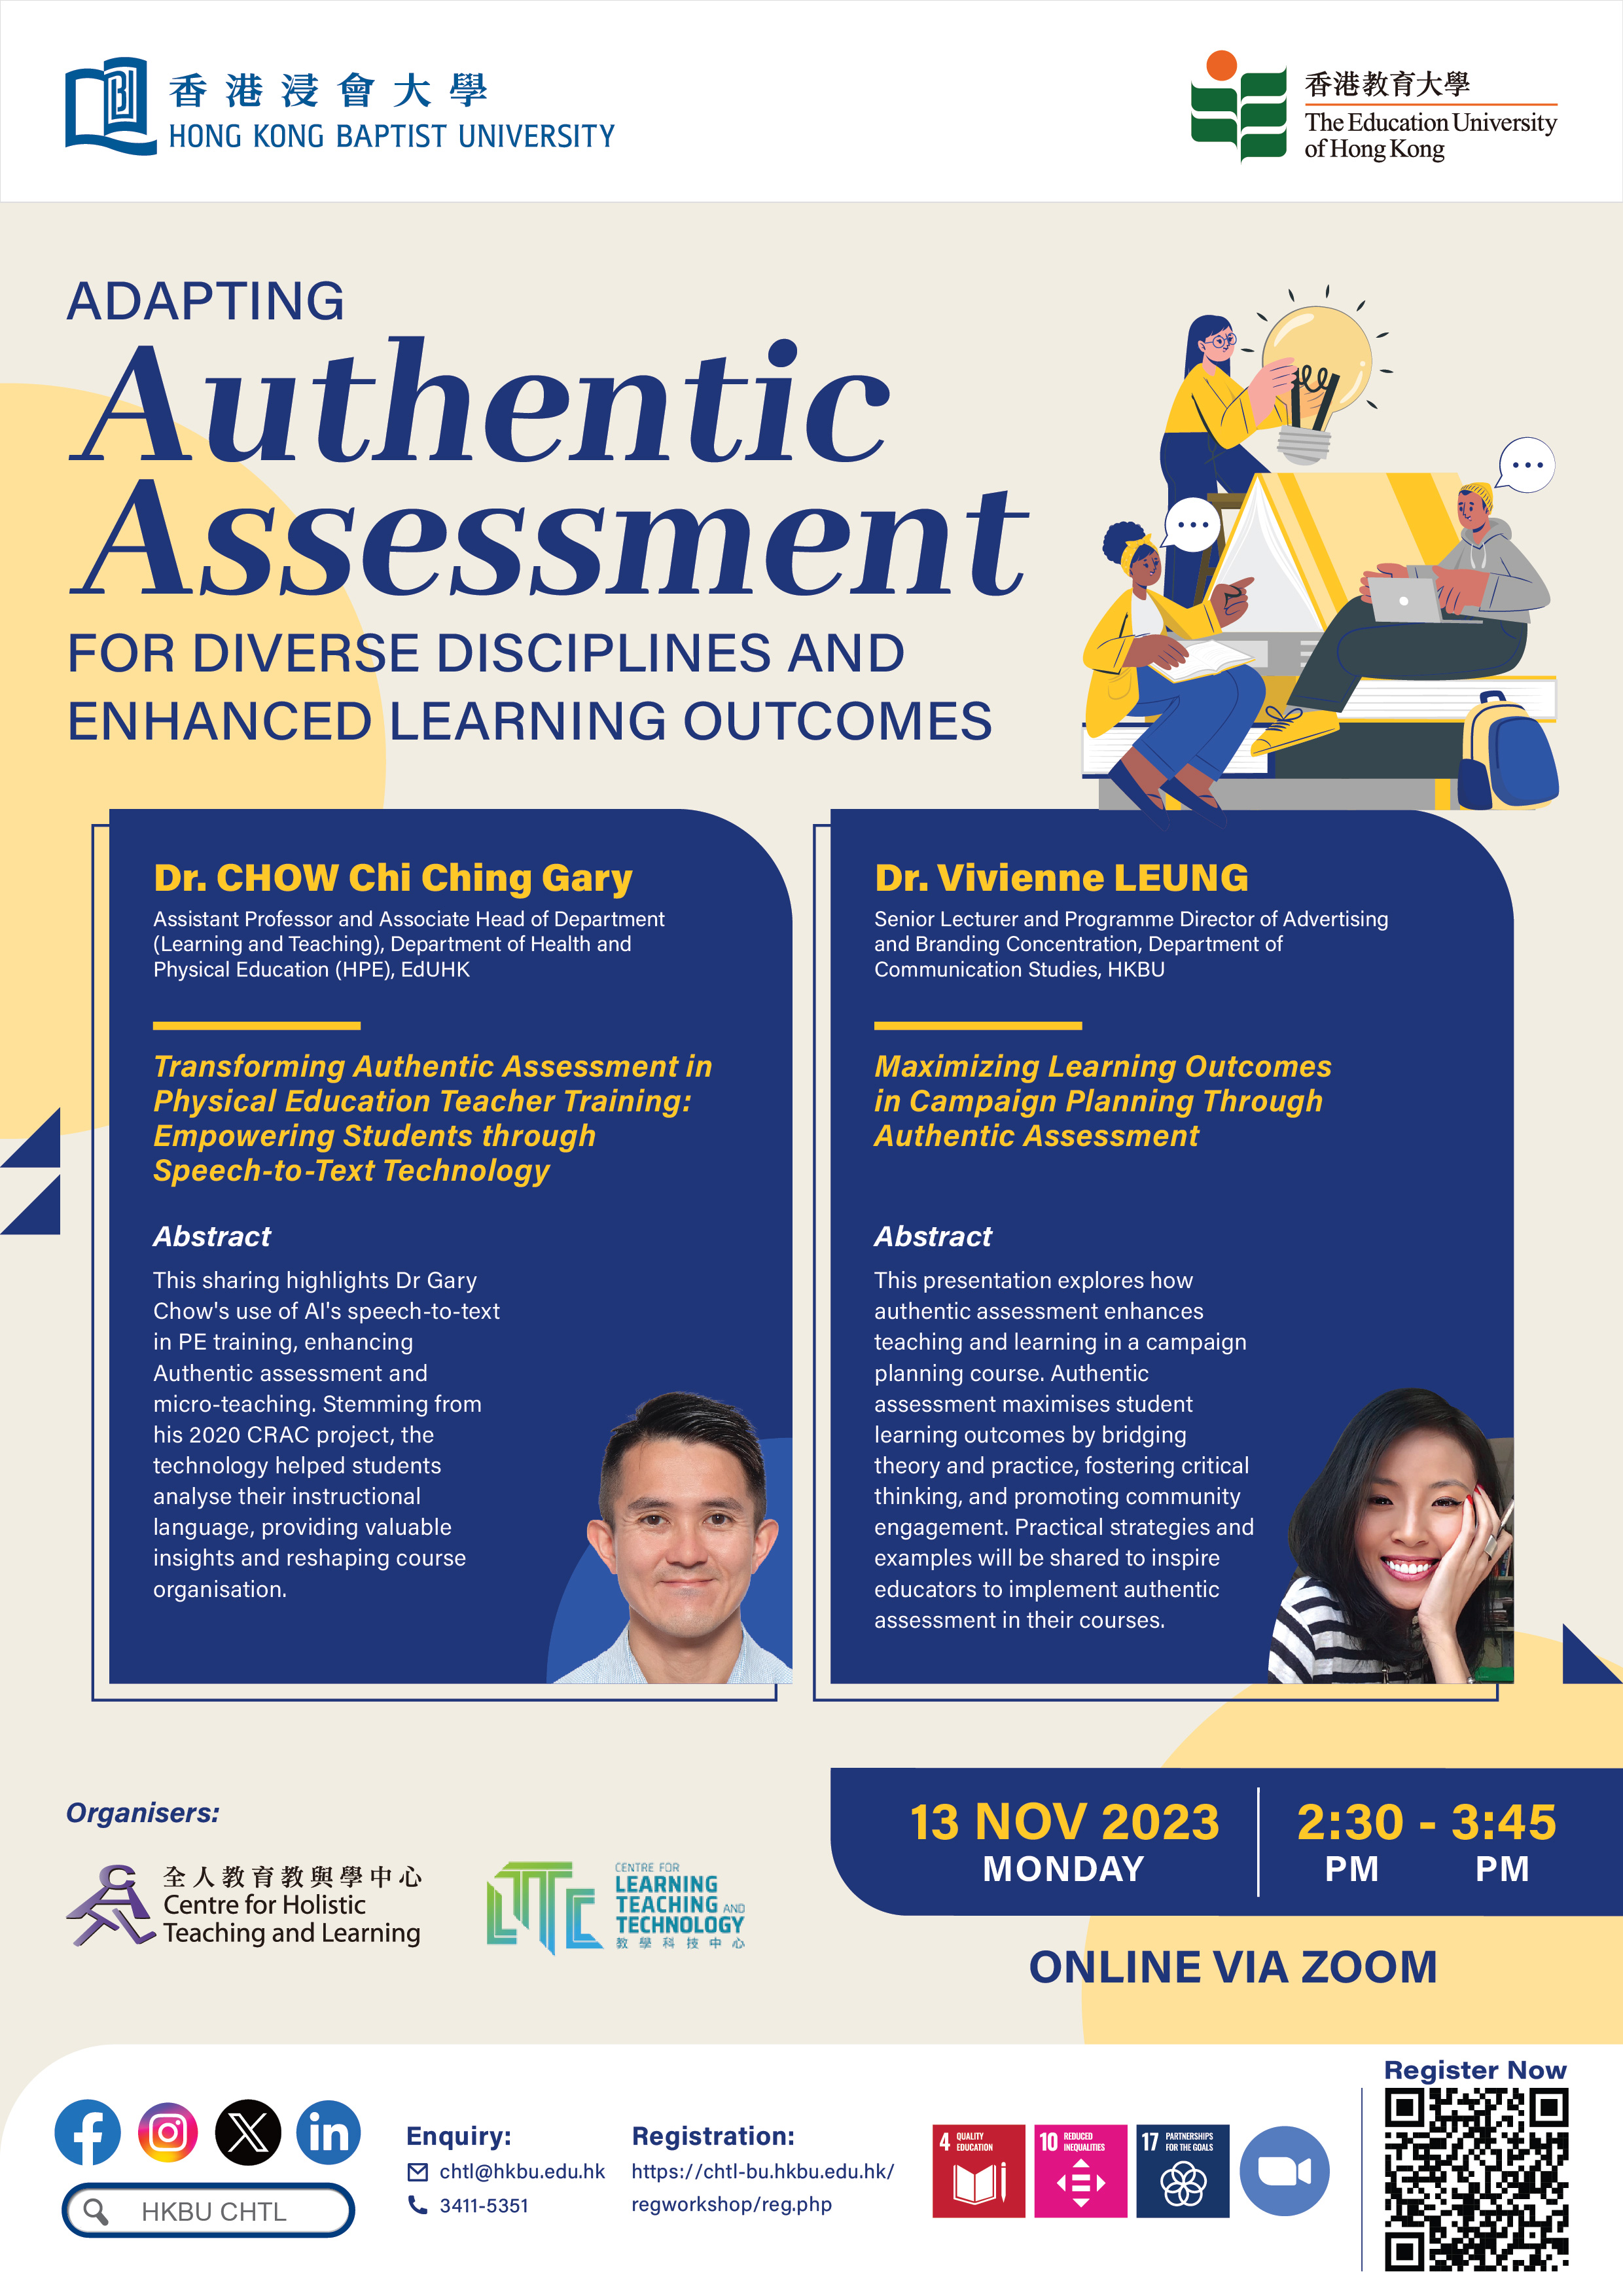 Adapting Authentic Assessment for Diverse Disciplines and Enhanced Learning Outcomes